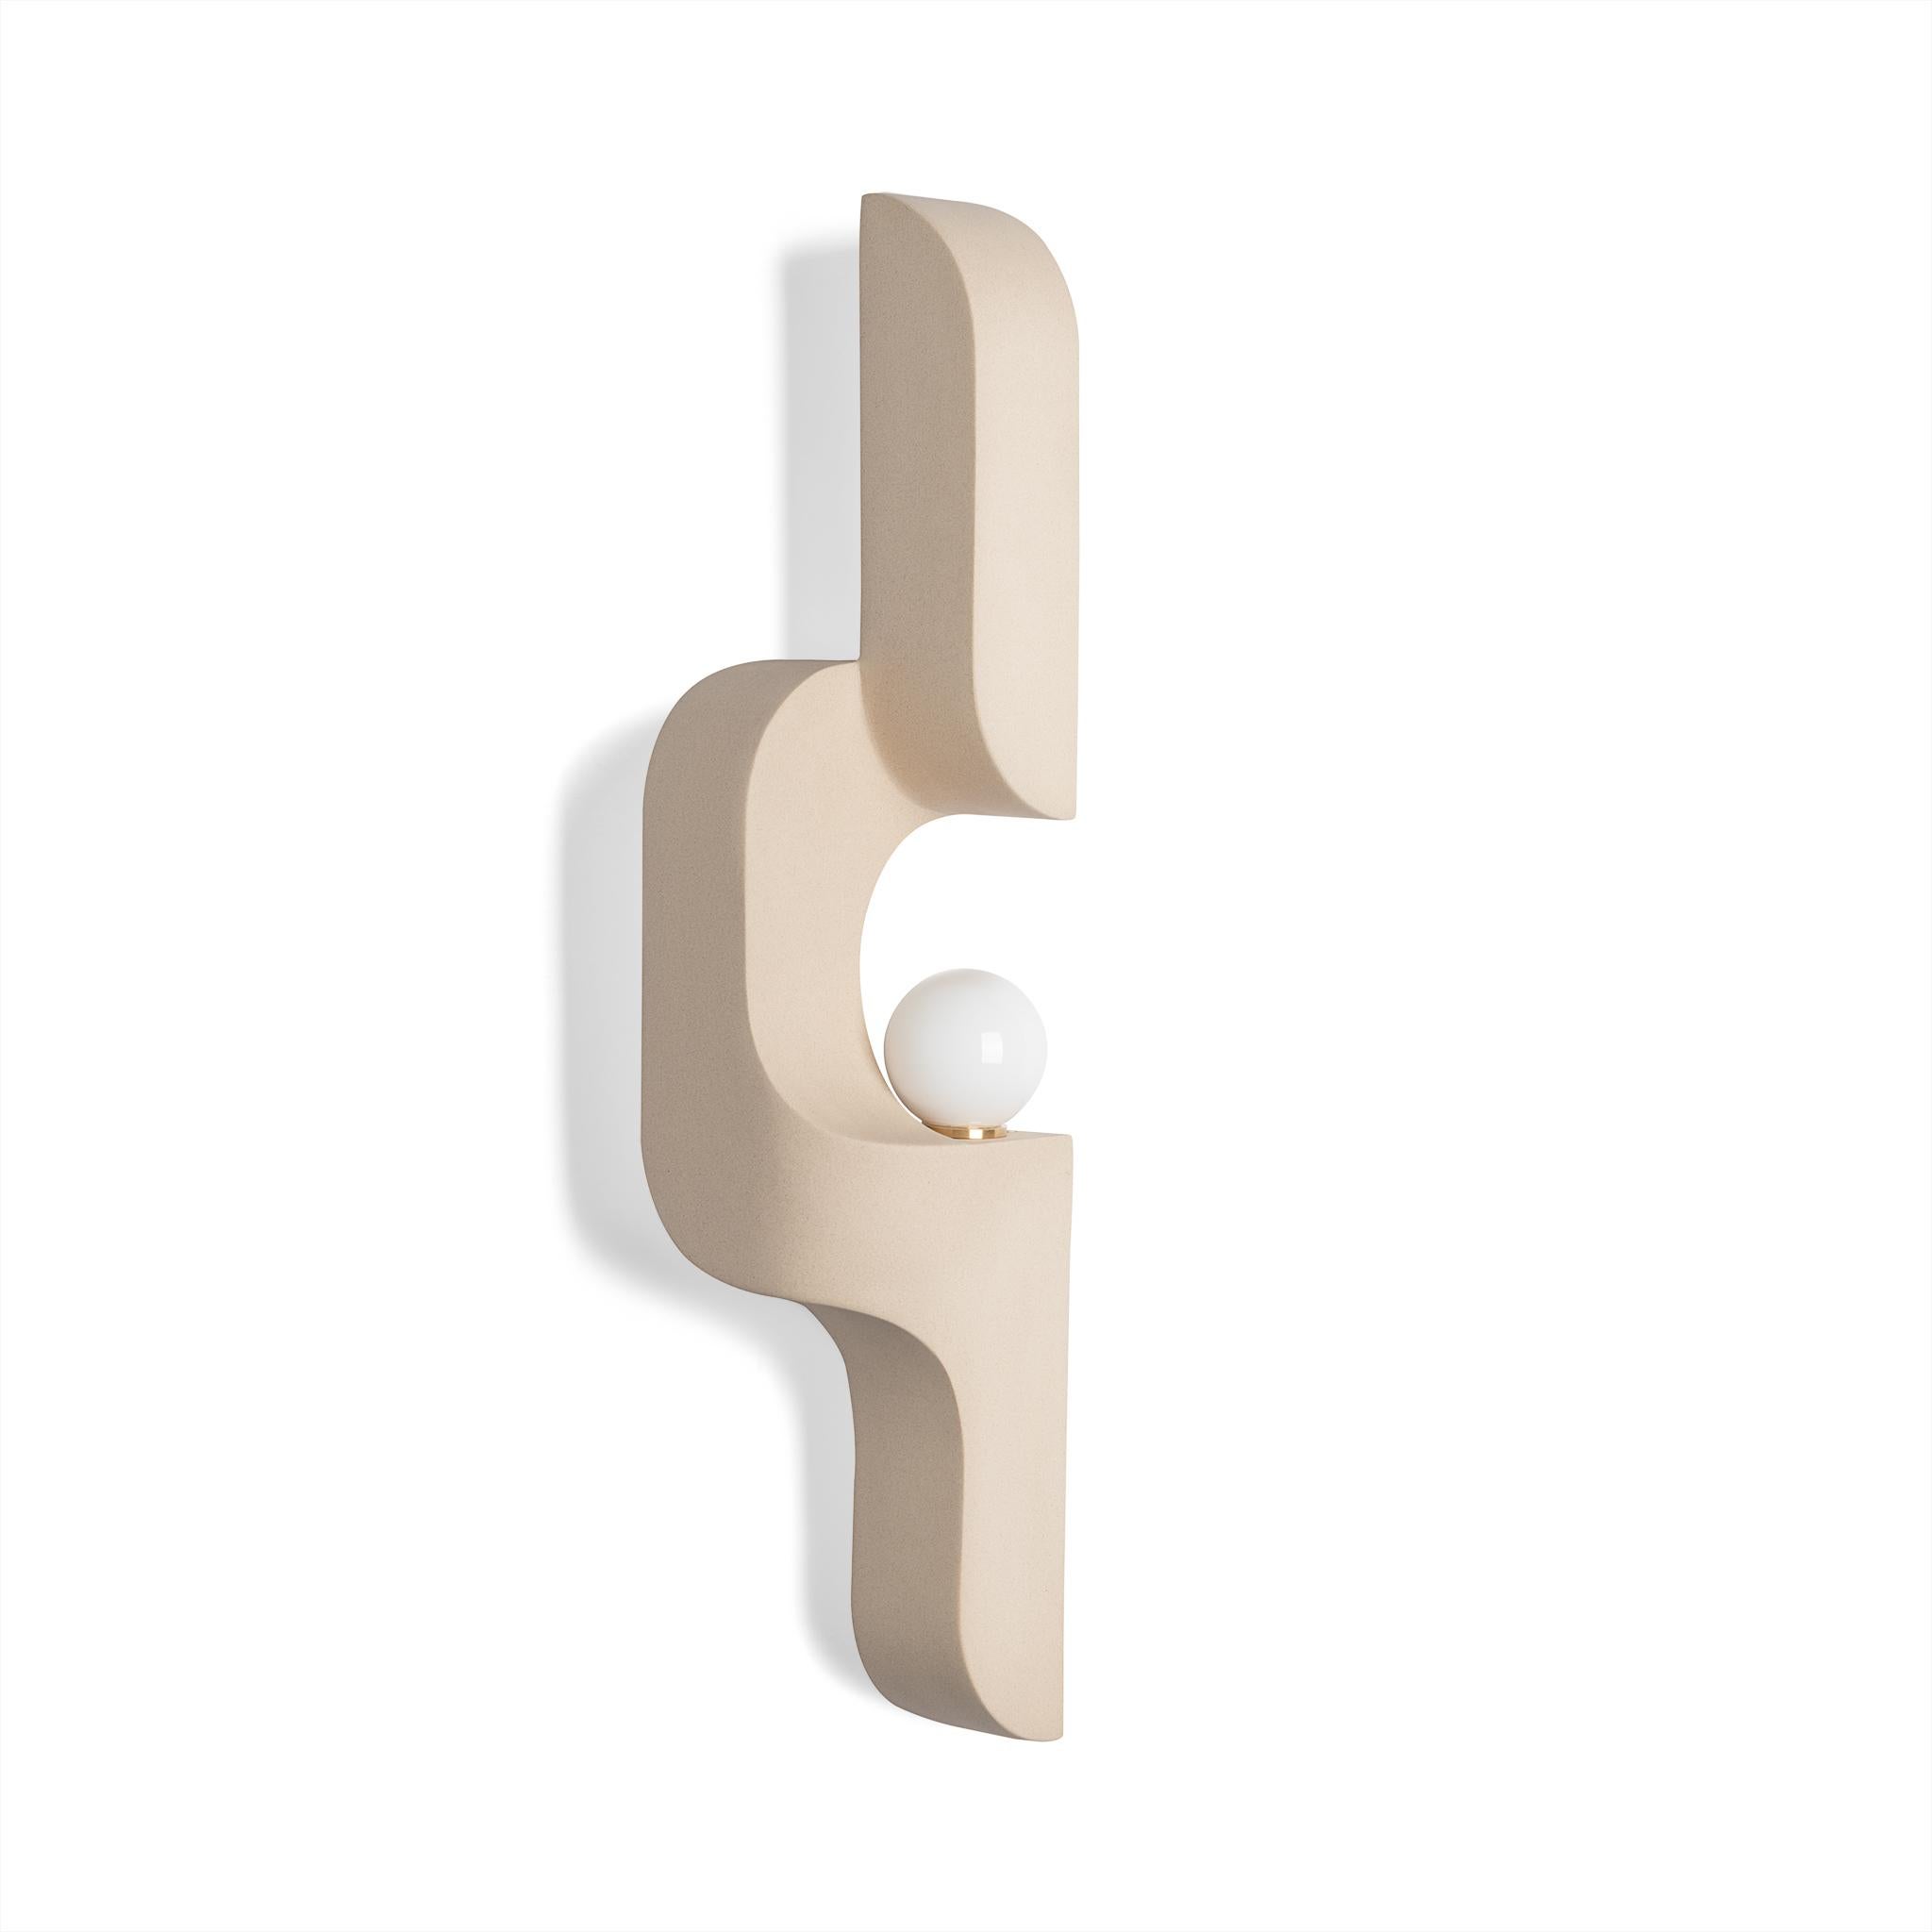 In this sandy slipcast ceramic wall sconce, generous curves are paired with crisp edges and the repetition of geometry to create a flow. The sconce snakes up and off the wall, a sculptural lighting piece that's understated, and almost artifact-like.